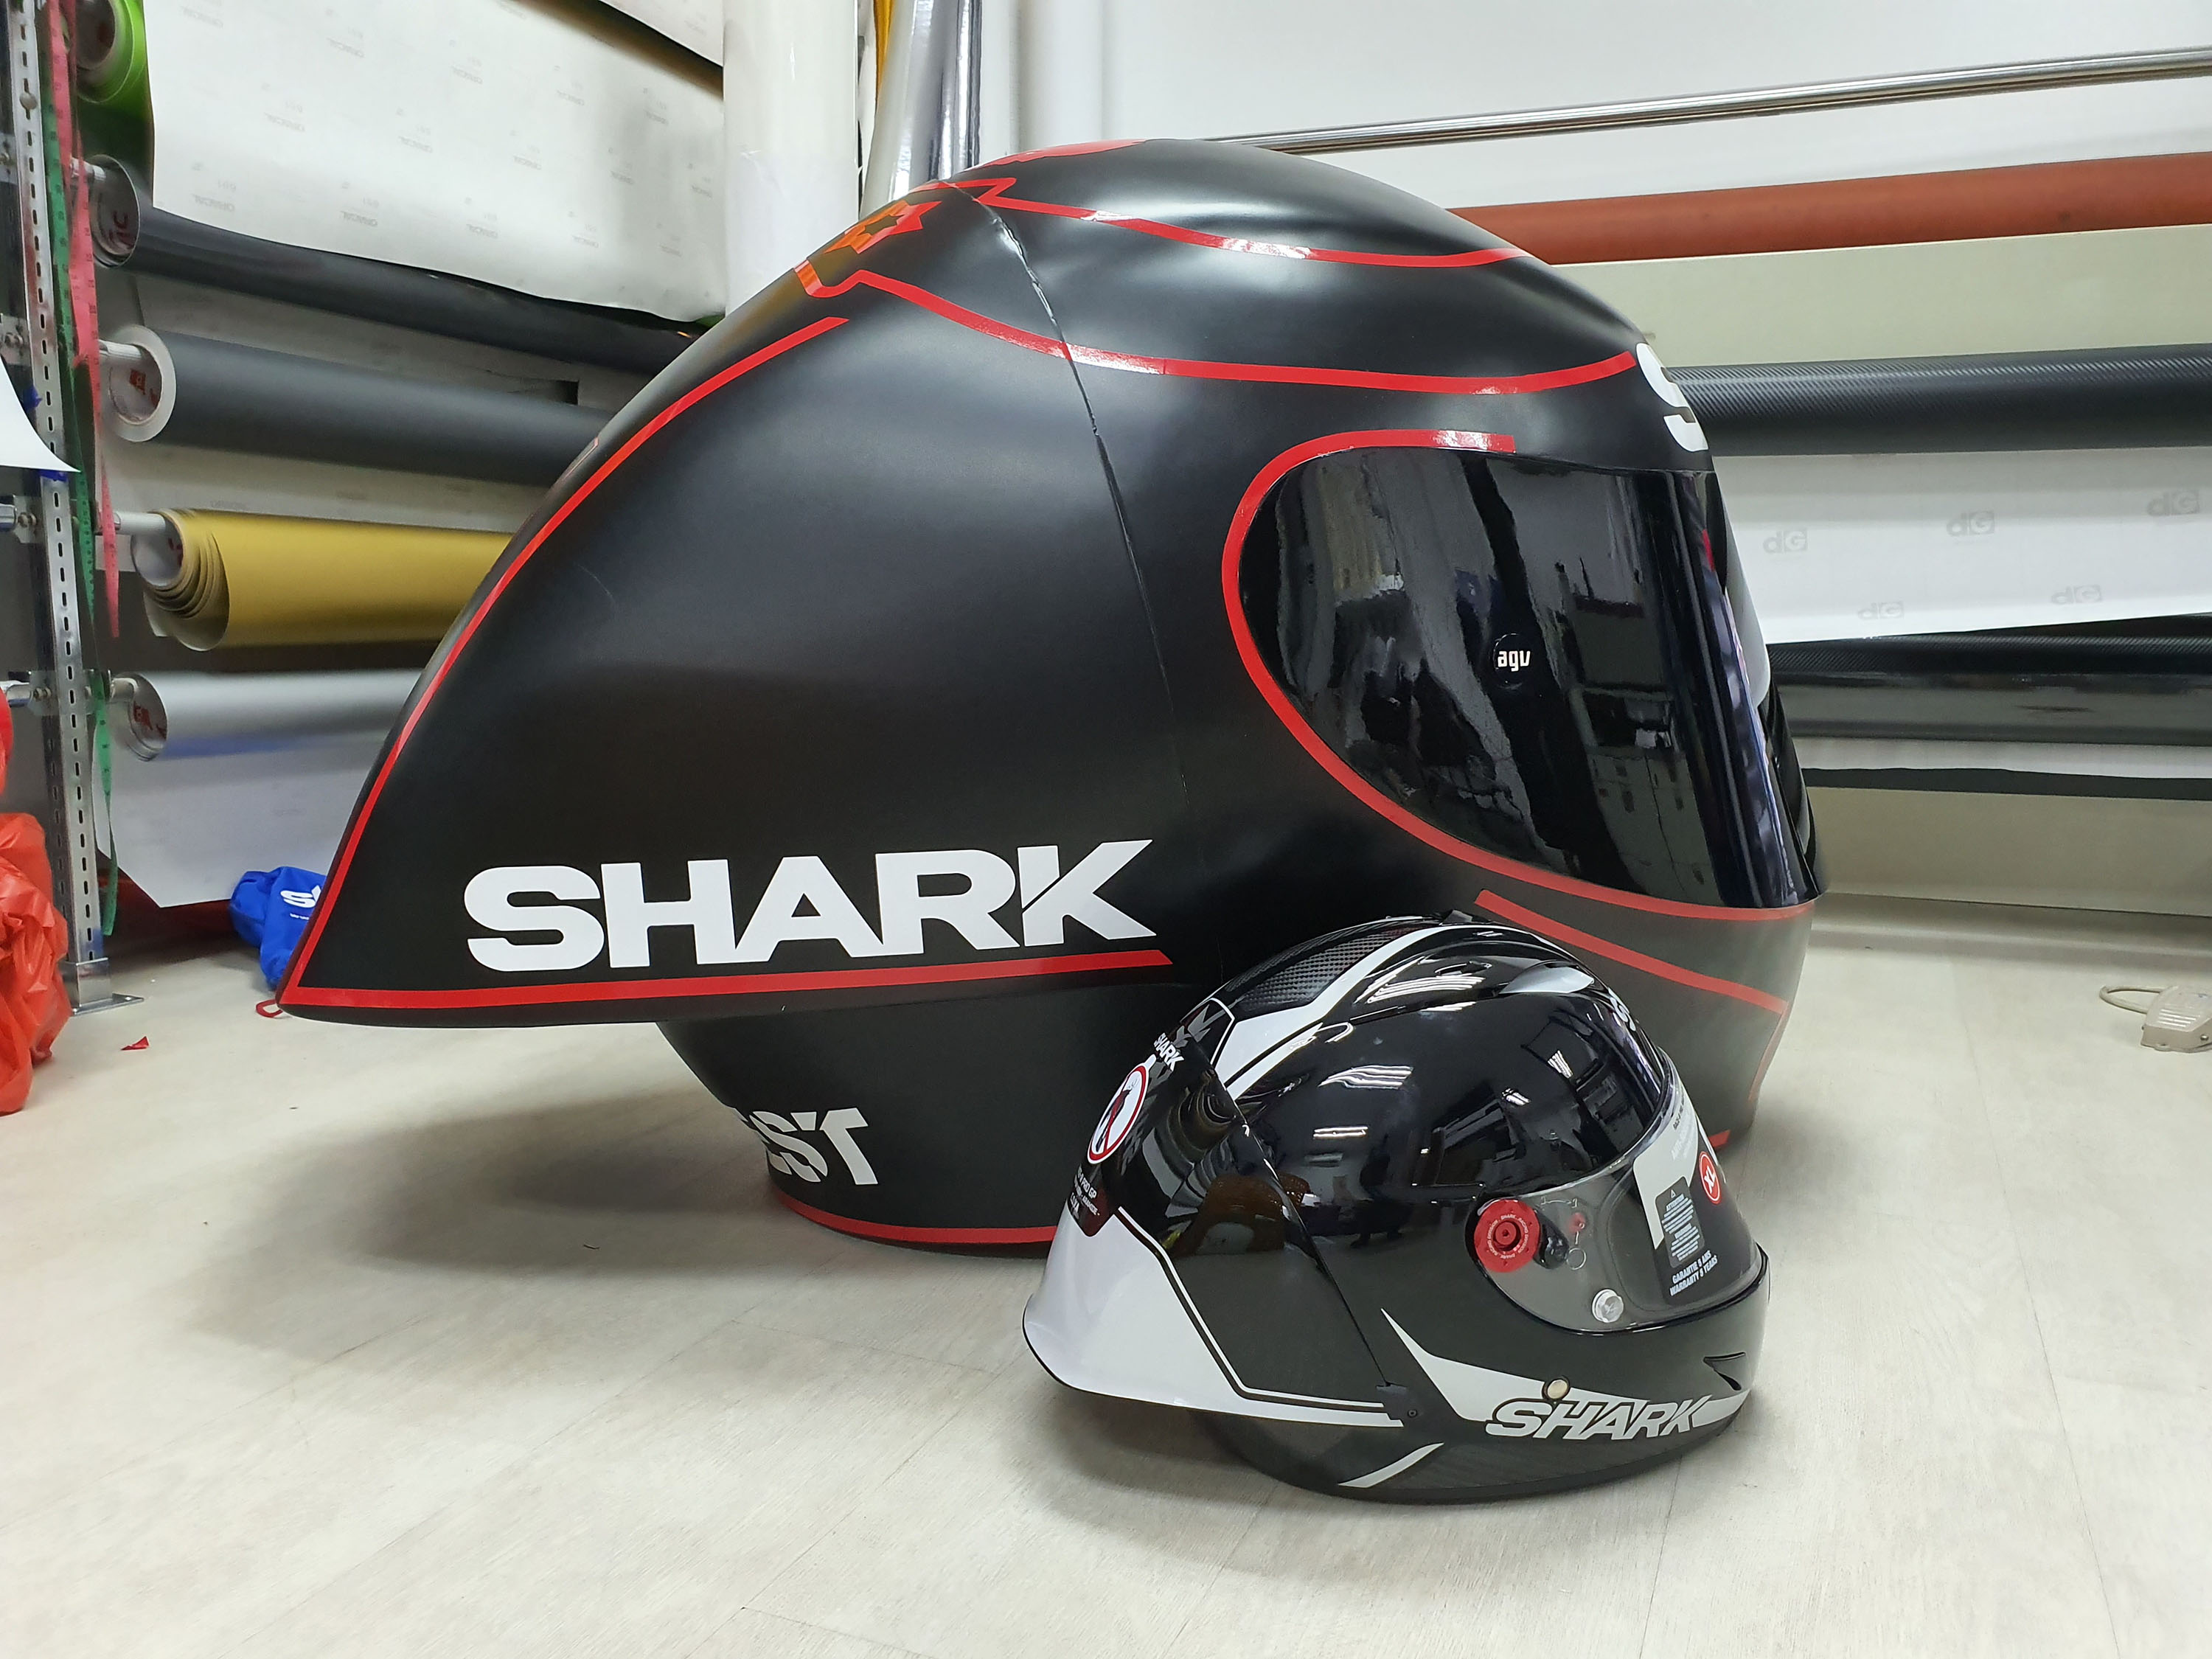 Side profile of the Gigantic Shark Helmet Decal applied. Comparing it with a normal helmet size